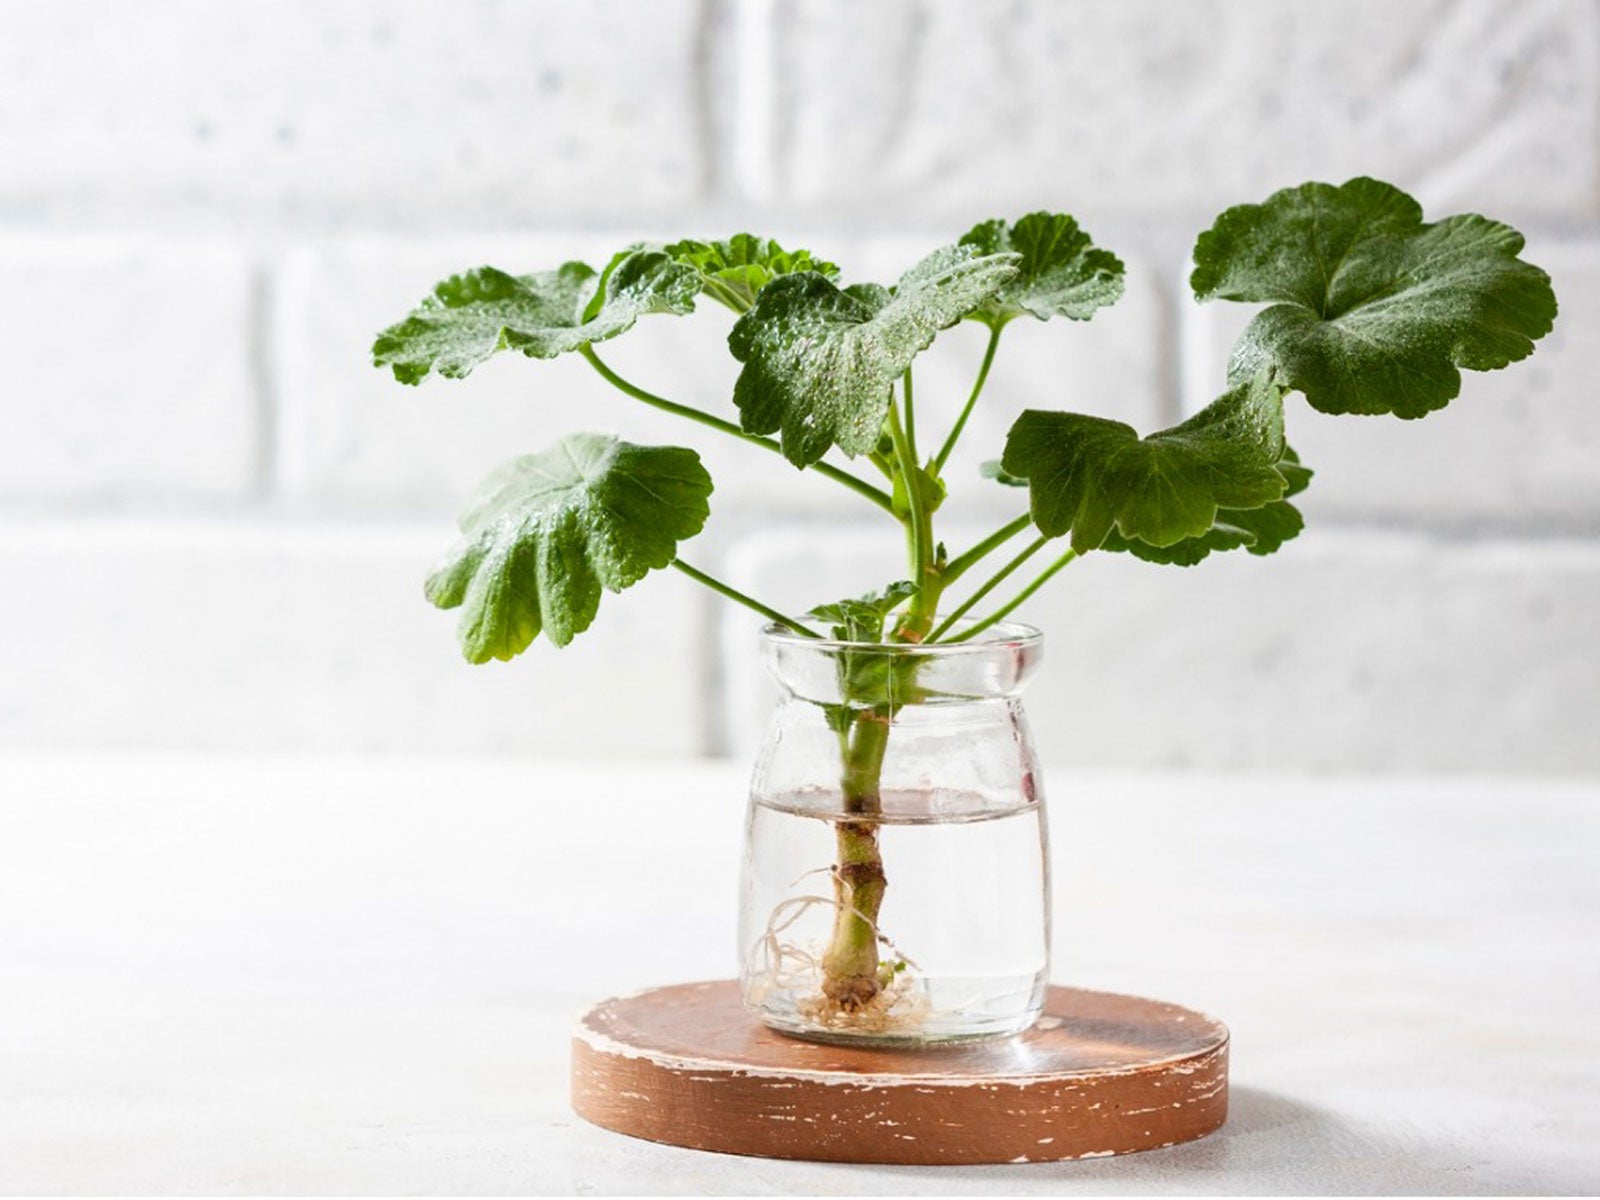 A geranium cutting taking root in a glass of water